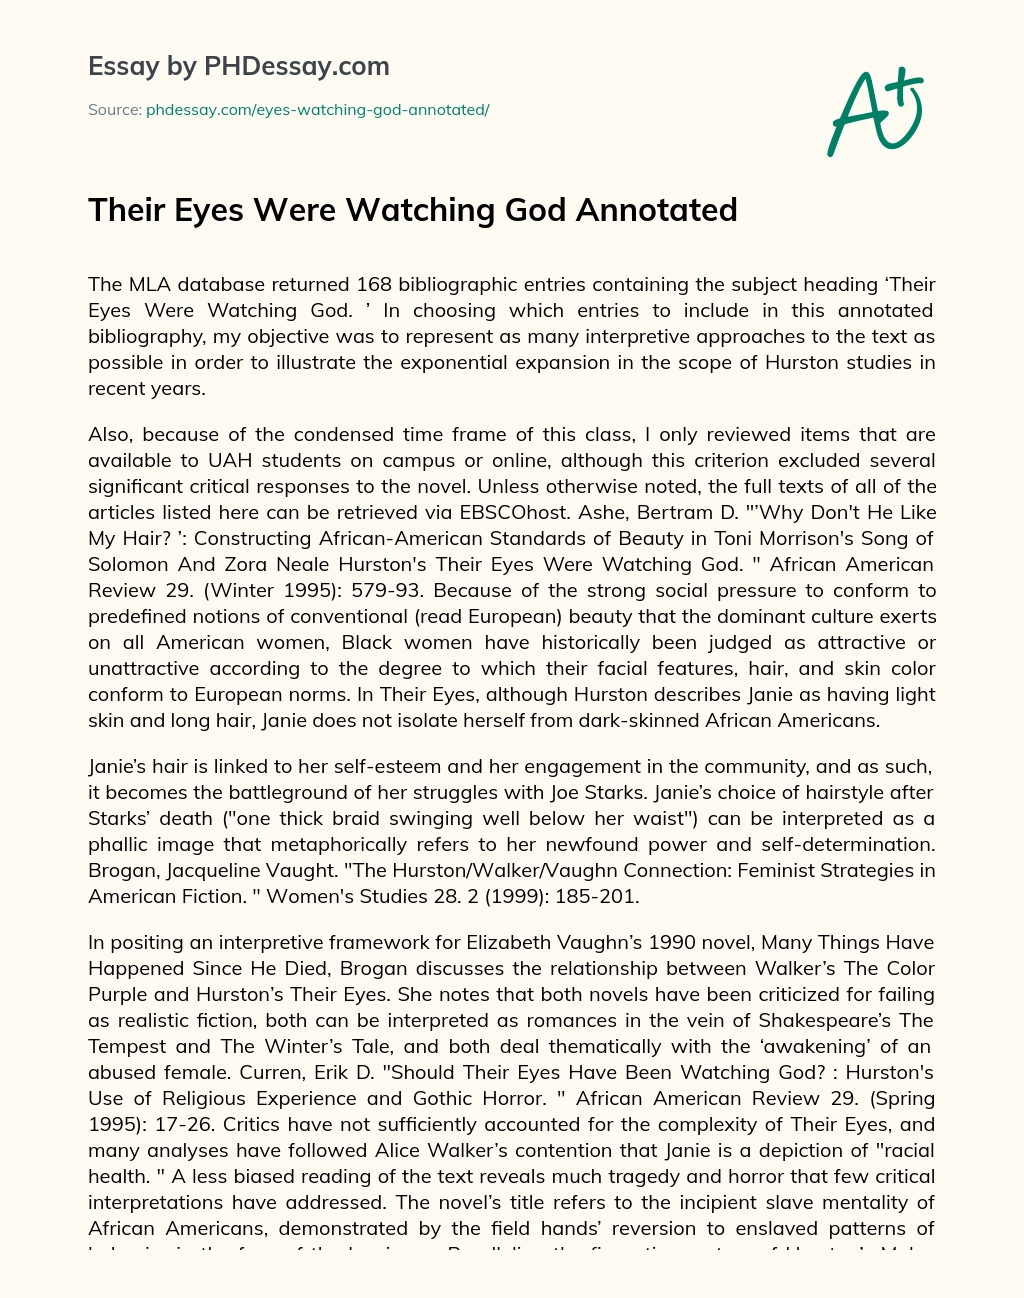 Their Eyes Were Watching God Annotated essay